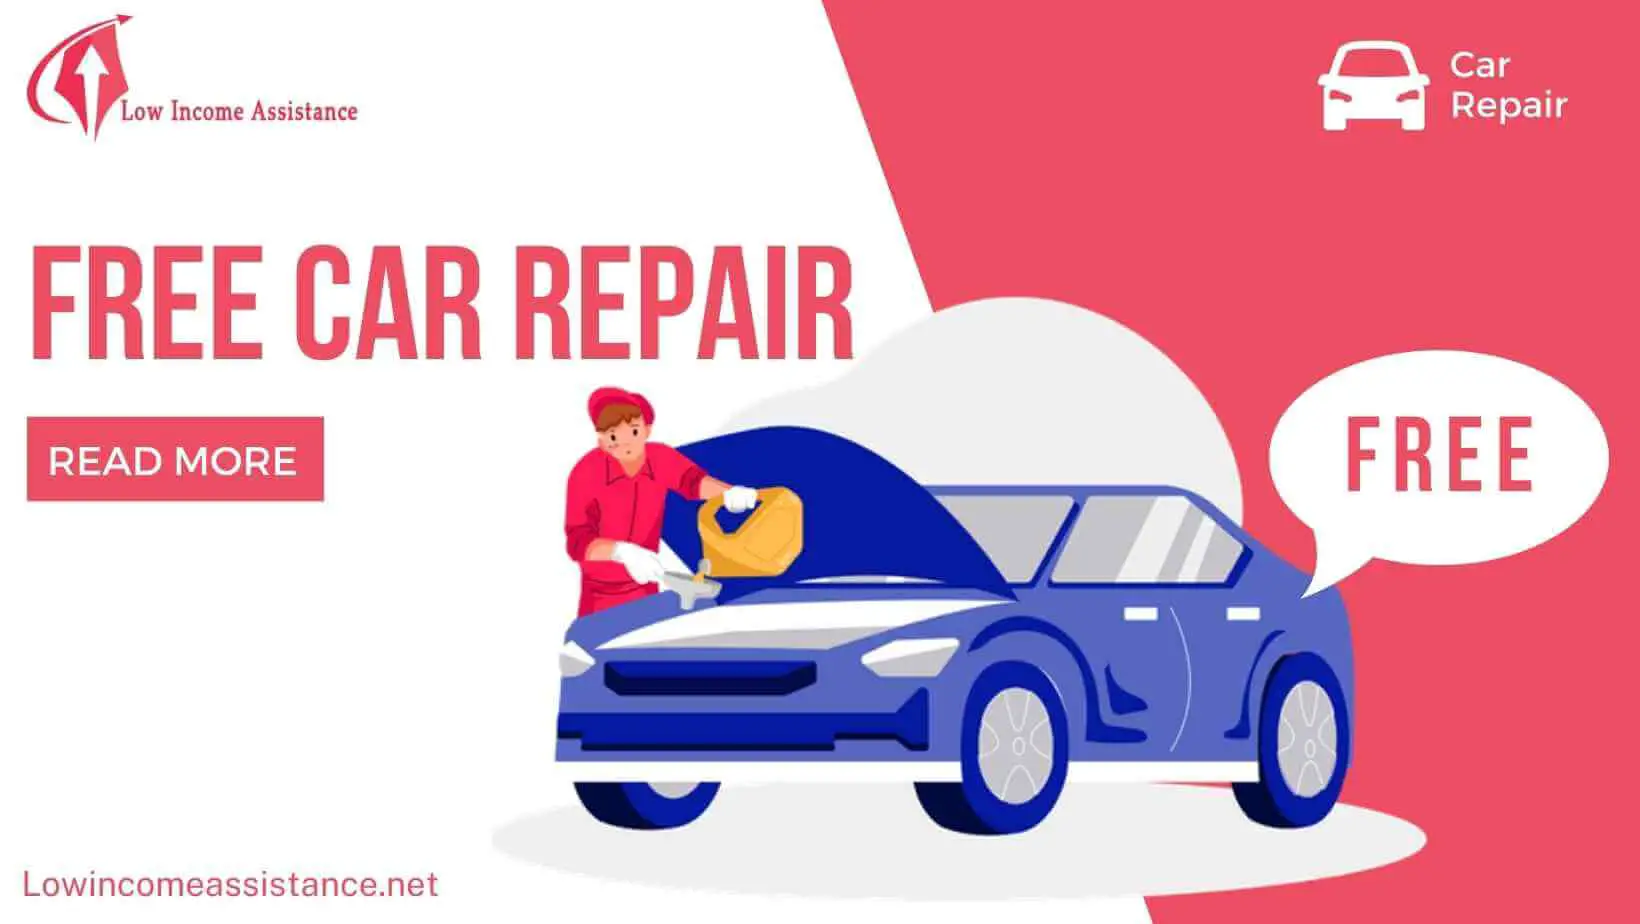 Free car repair for low-income families